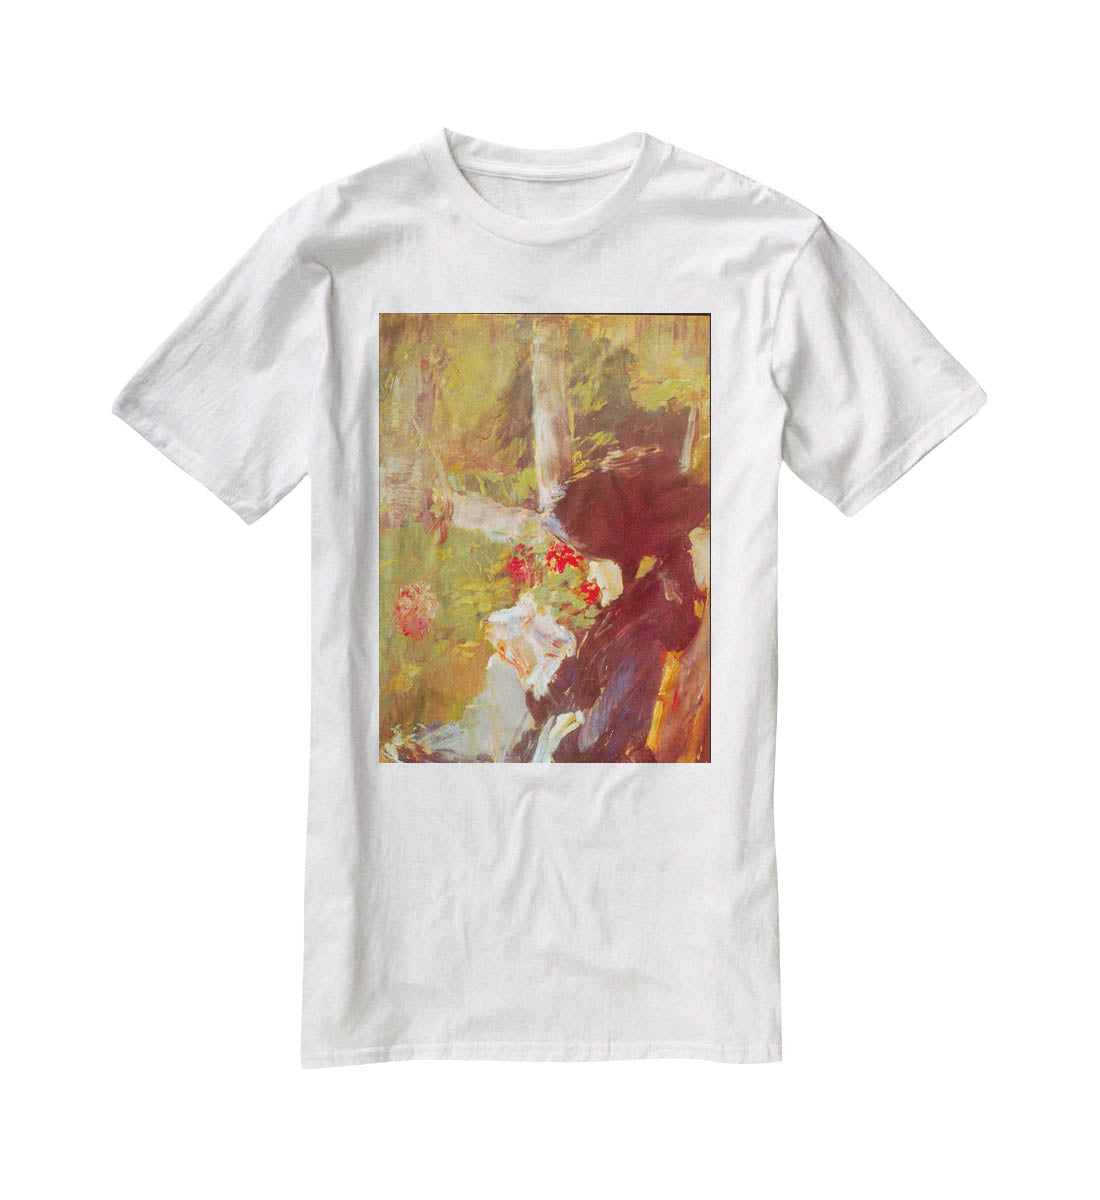 Manets Mother by Manet T-Shirt - Canvas Art Rocks - 5